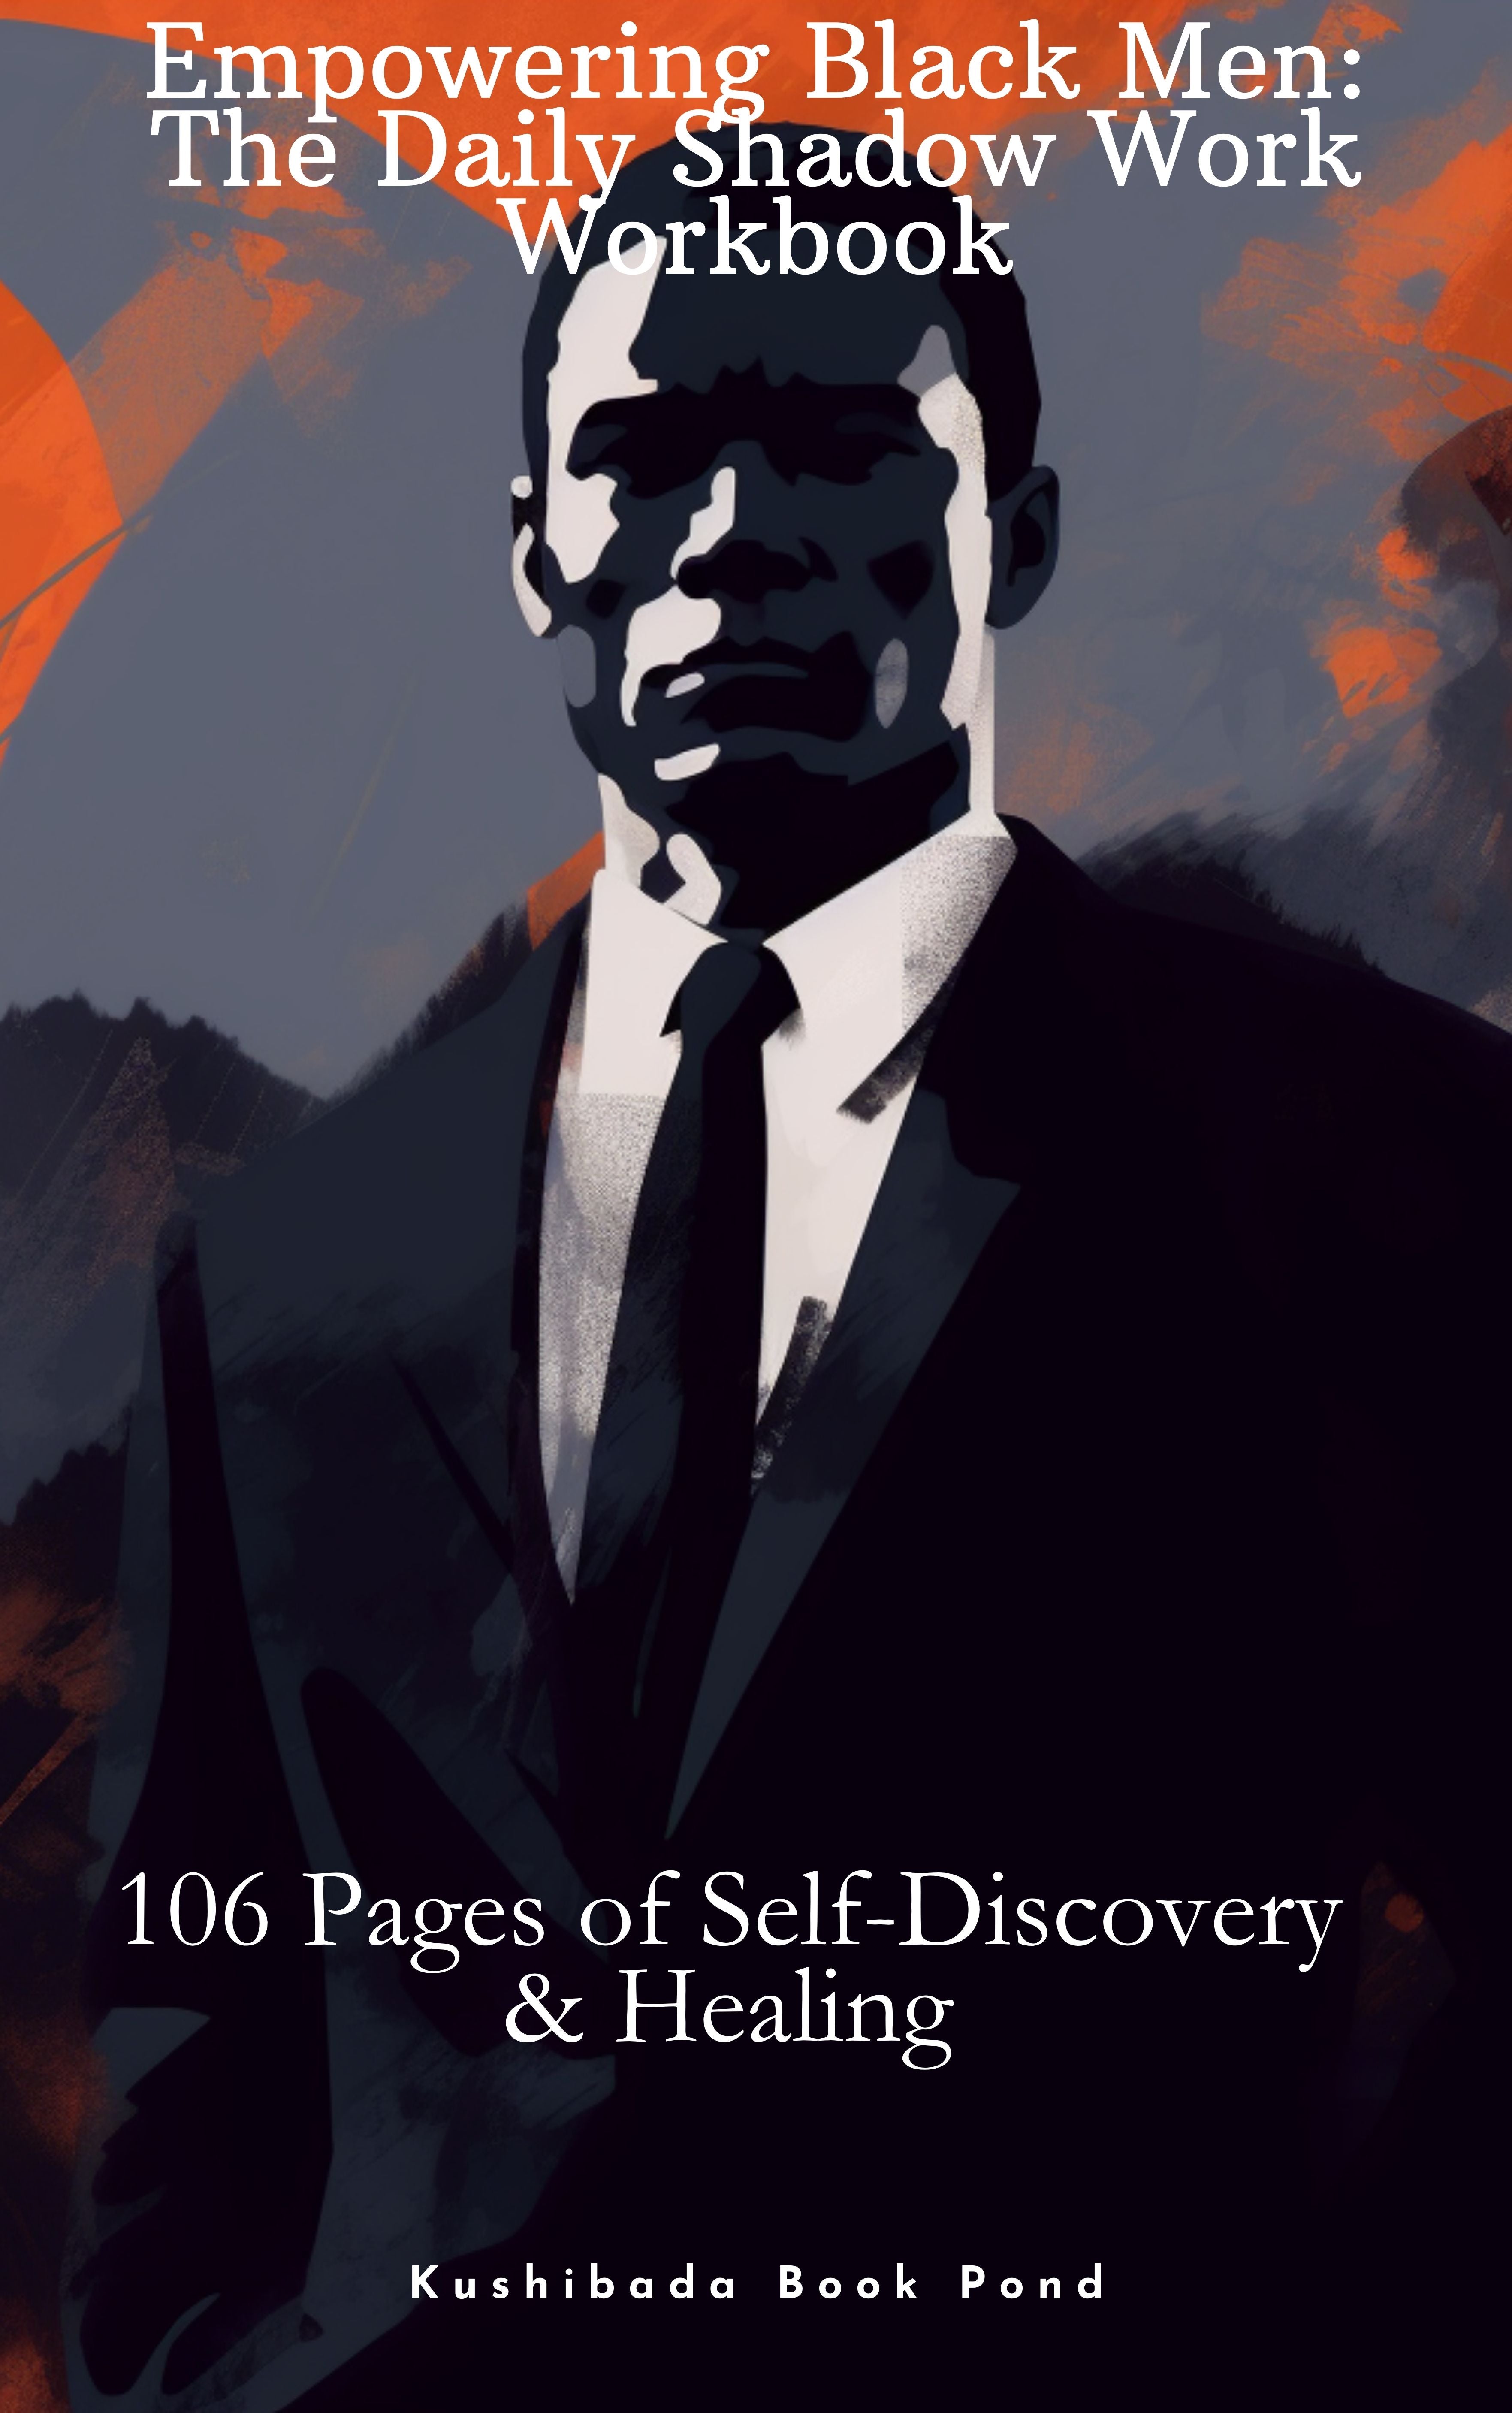 Empowering Black Men: The Daily Shadow Work Workbook PDF - 106 Pages of Self-Discovery & Healing